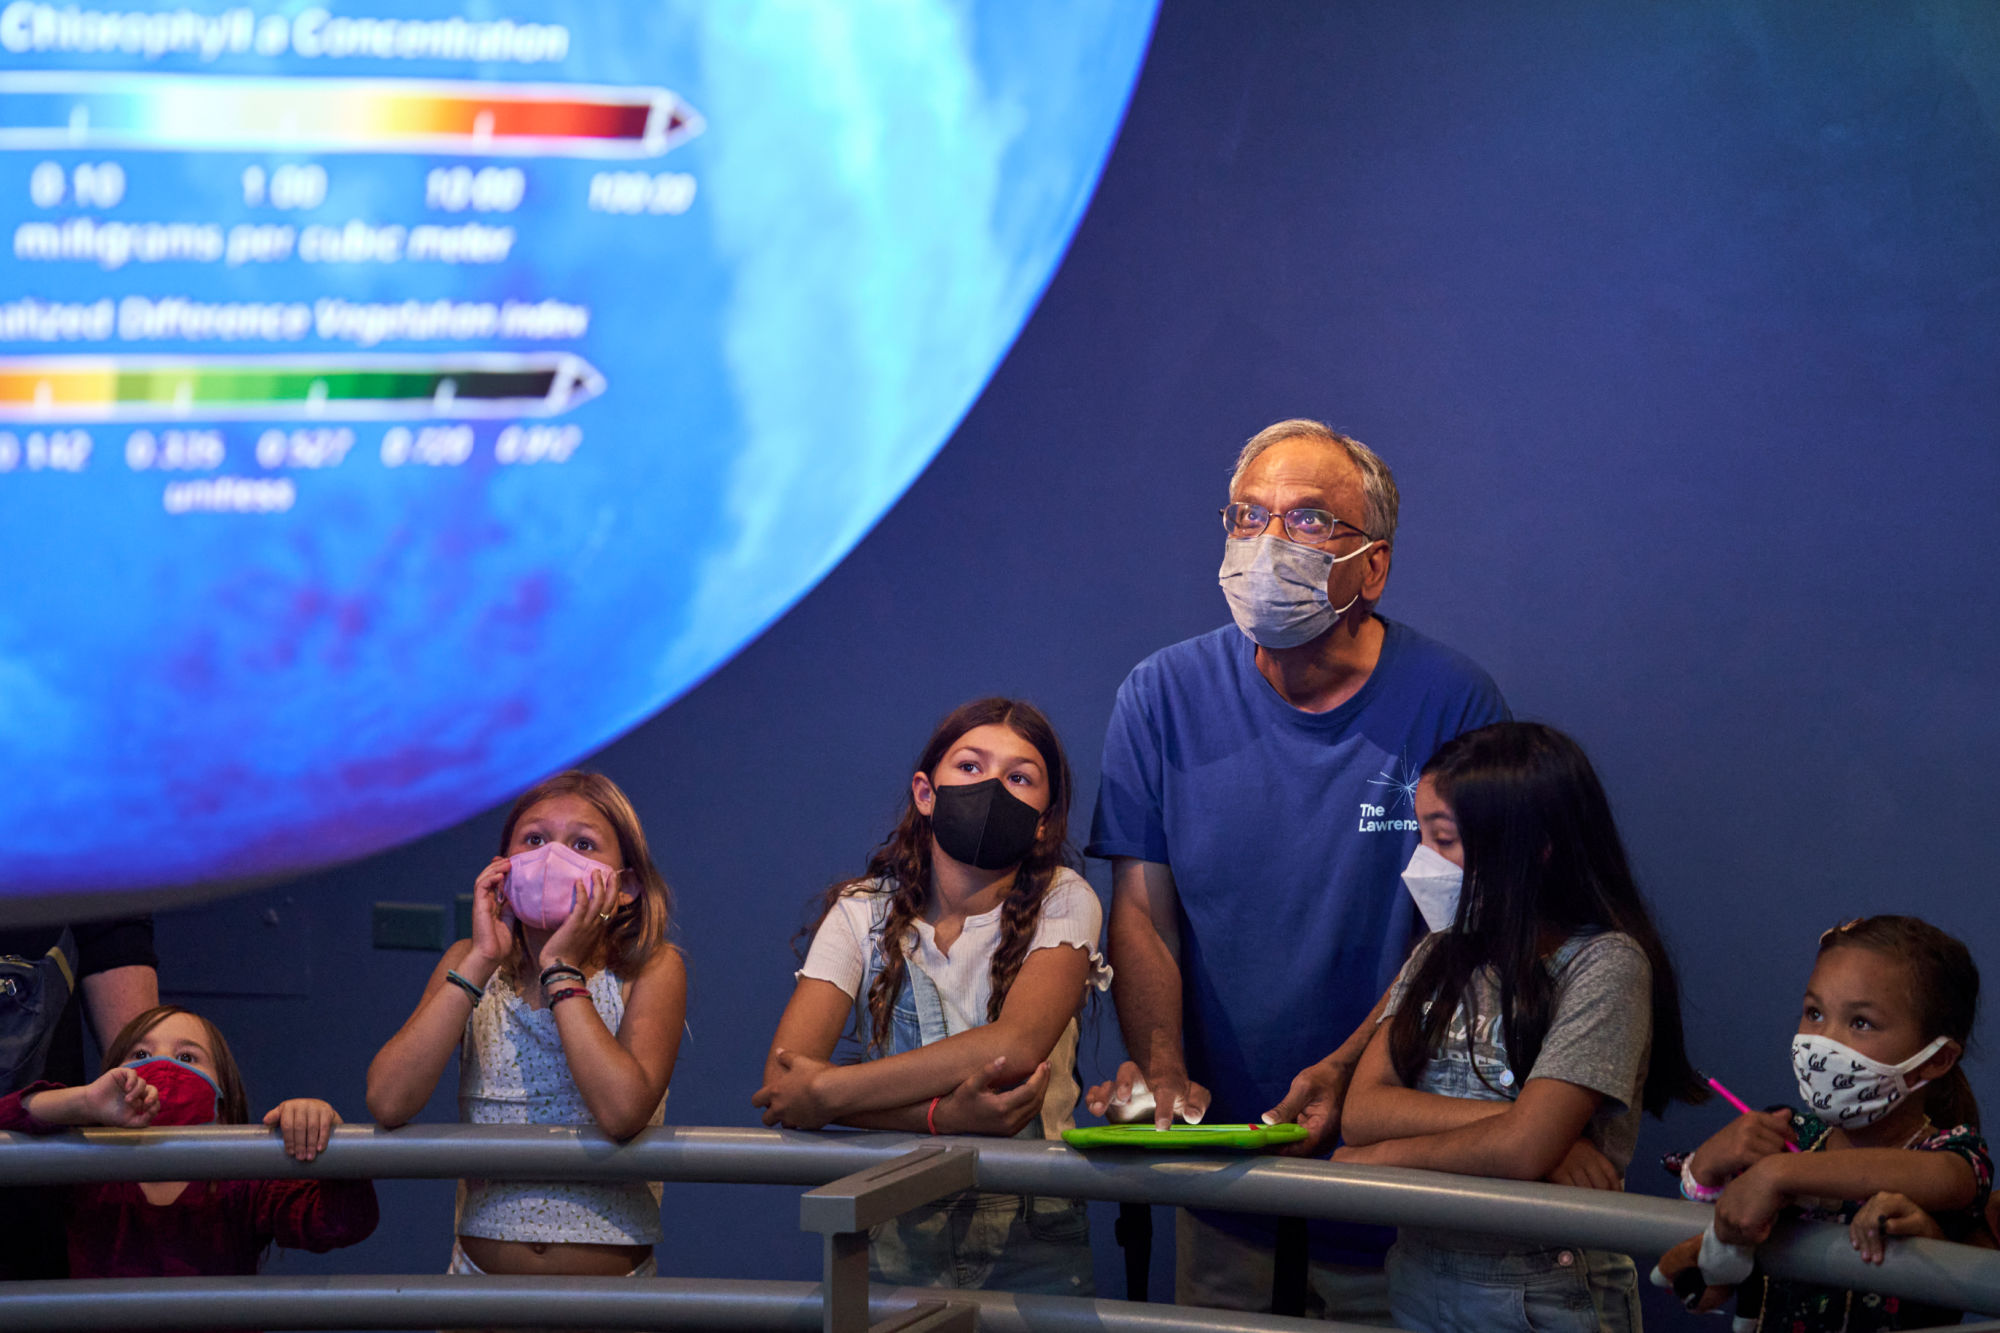 A man teaches kids before a scientific display on a large screen.